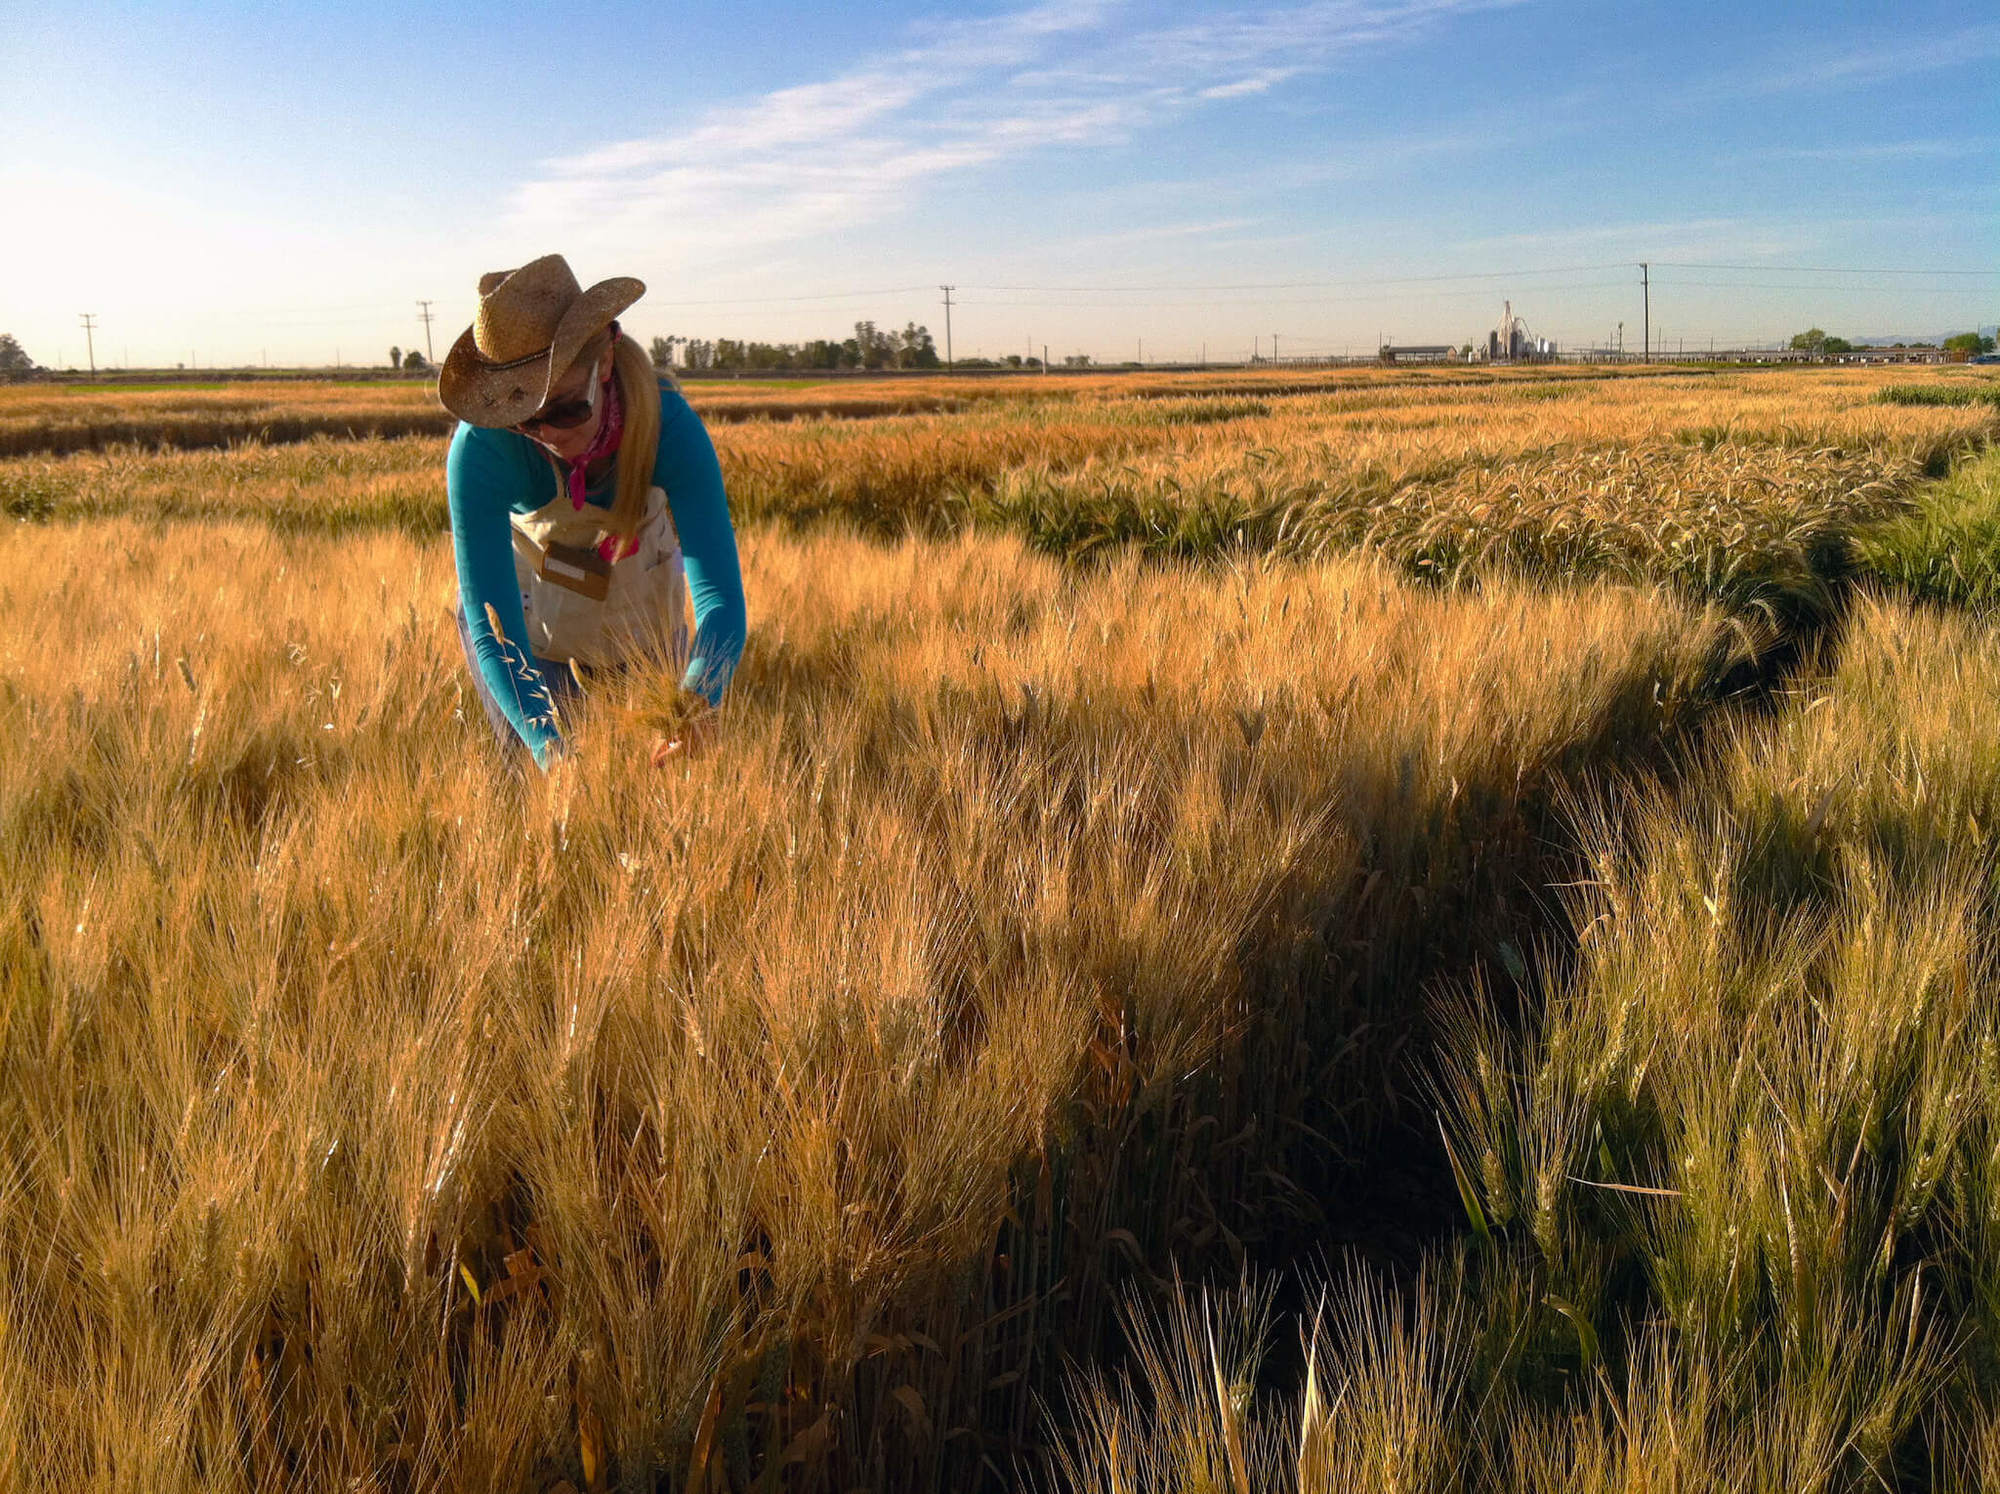 Brittany Hazard, a University of California-Davis doctoral student collecting samples from a wheat field. Throughout the month we’ll tell the story of